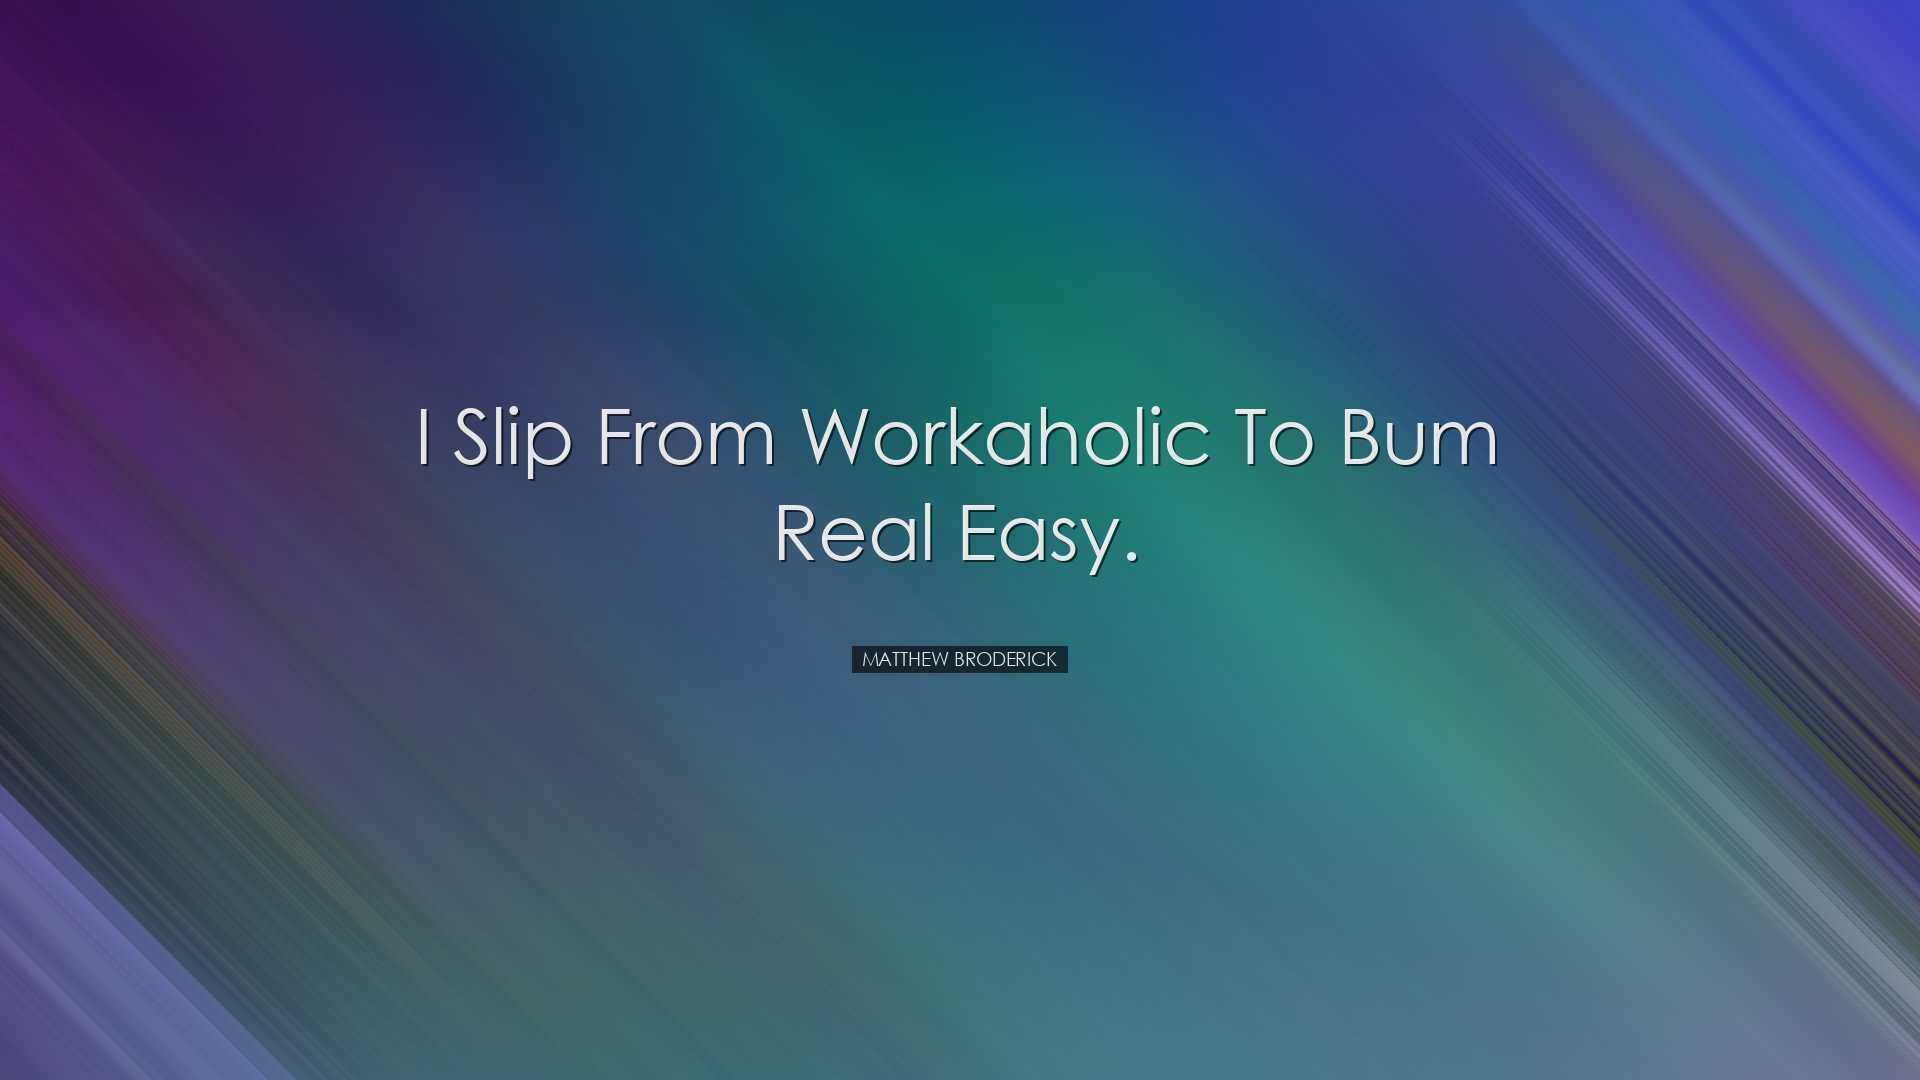 I slip from workaholic to bum real easy. - Matthew Broderick